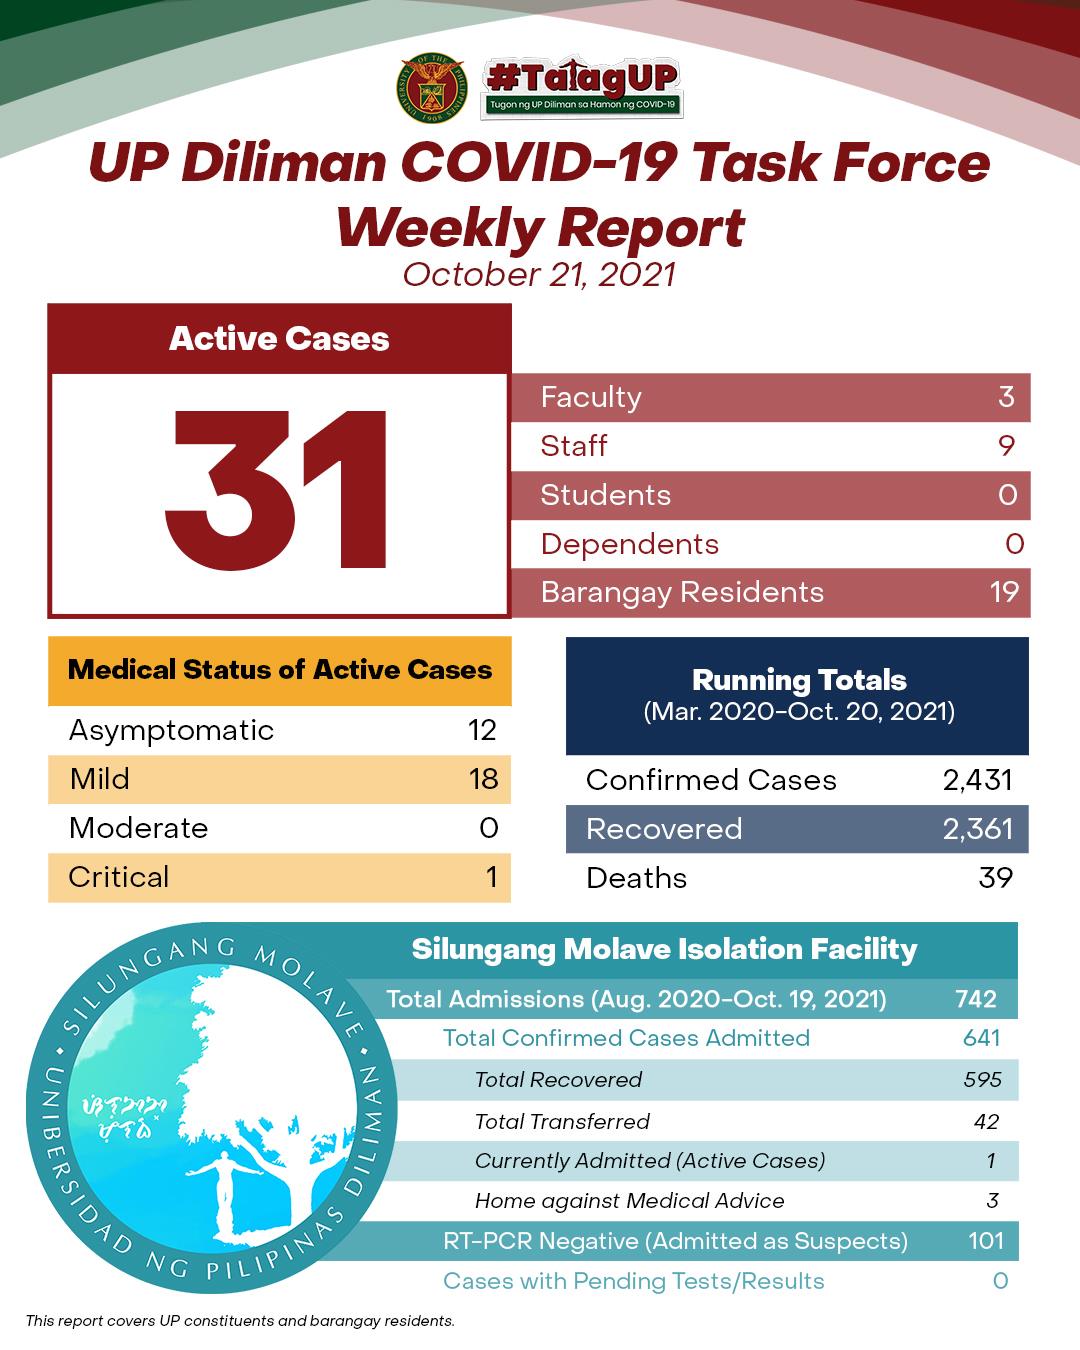 UP Diliman COVID-19 Task Force Weekly Report (October 21, 2021)